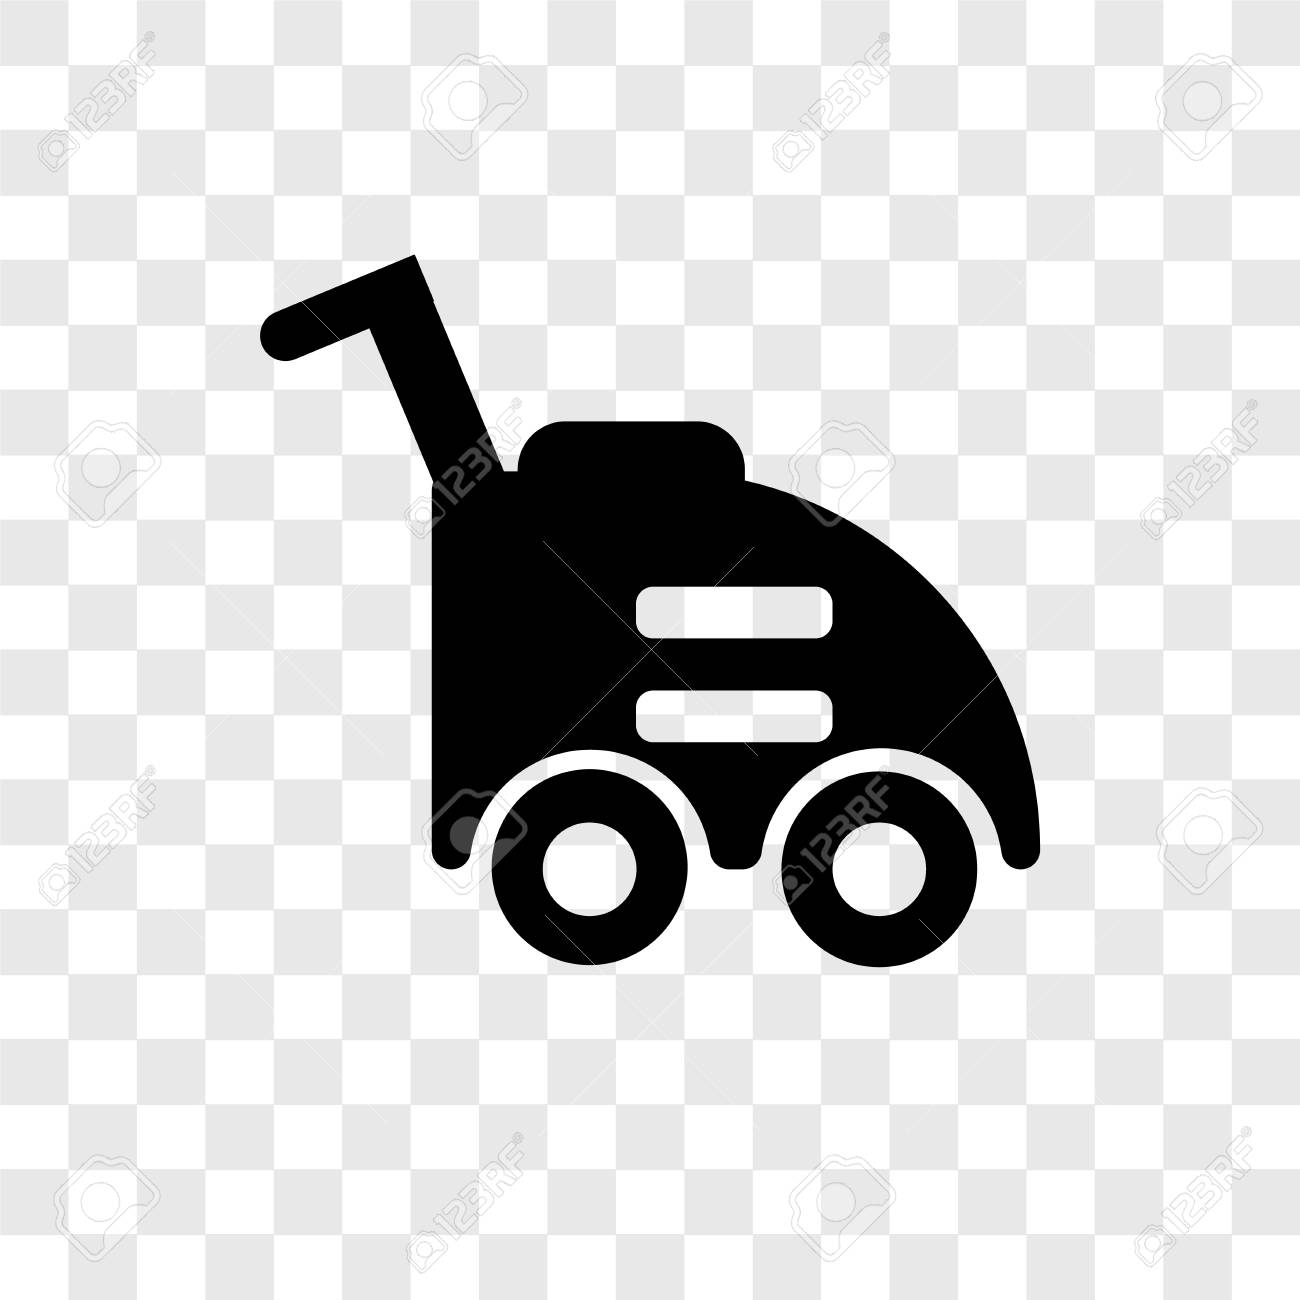 Lawn Mower Vector Icon Isolated On Transparent Background